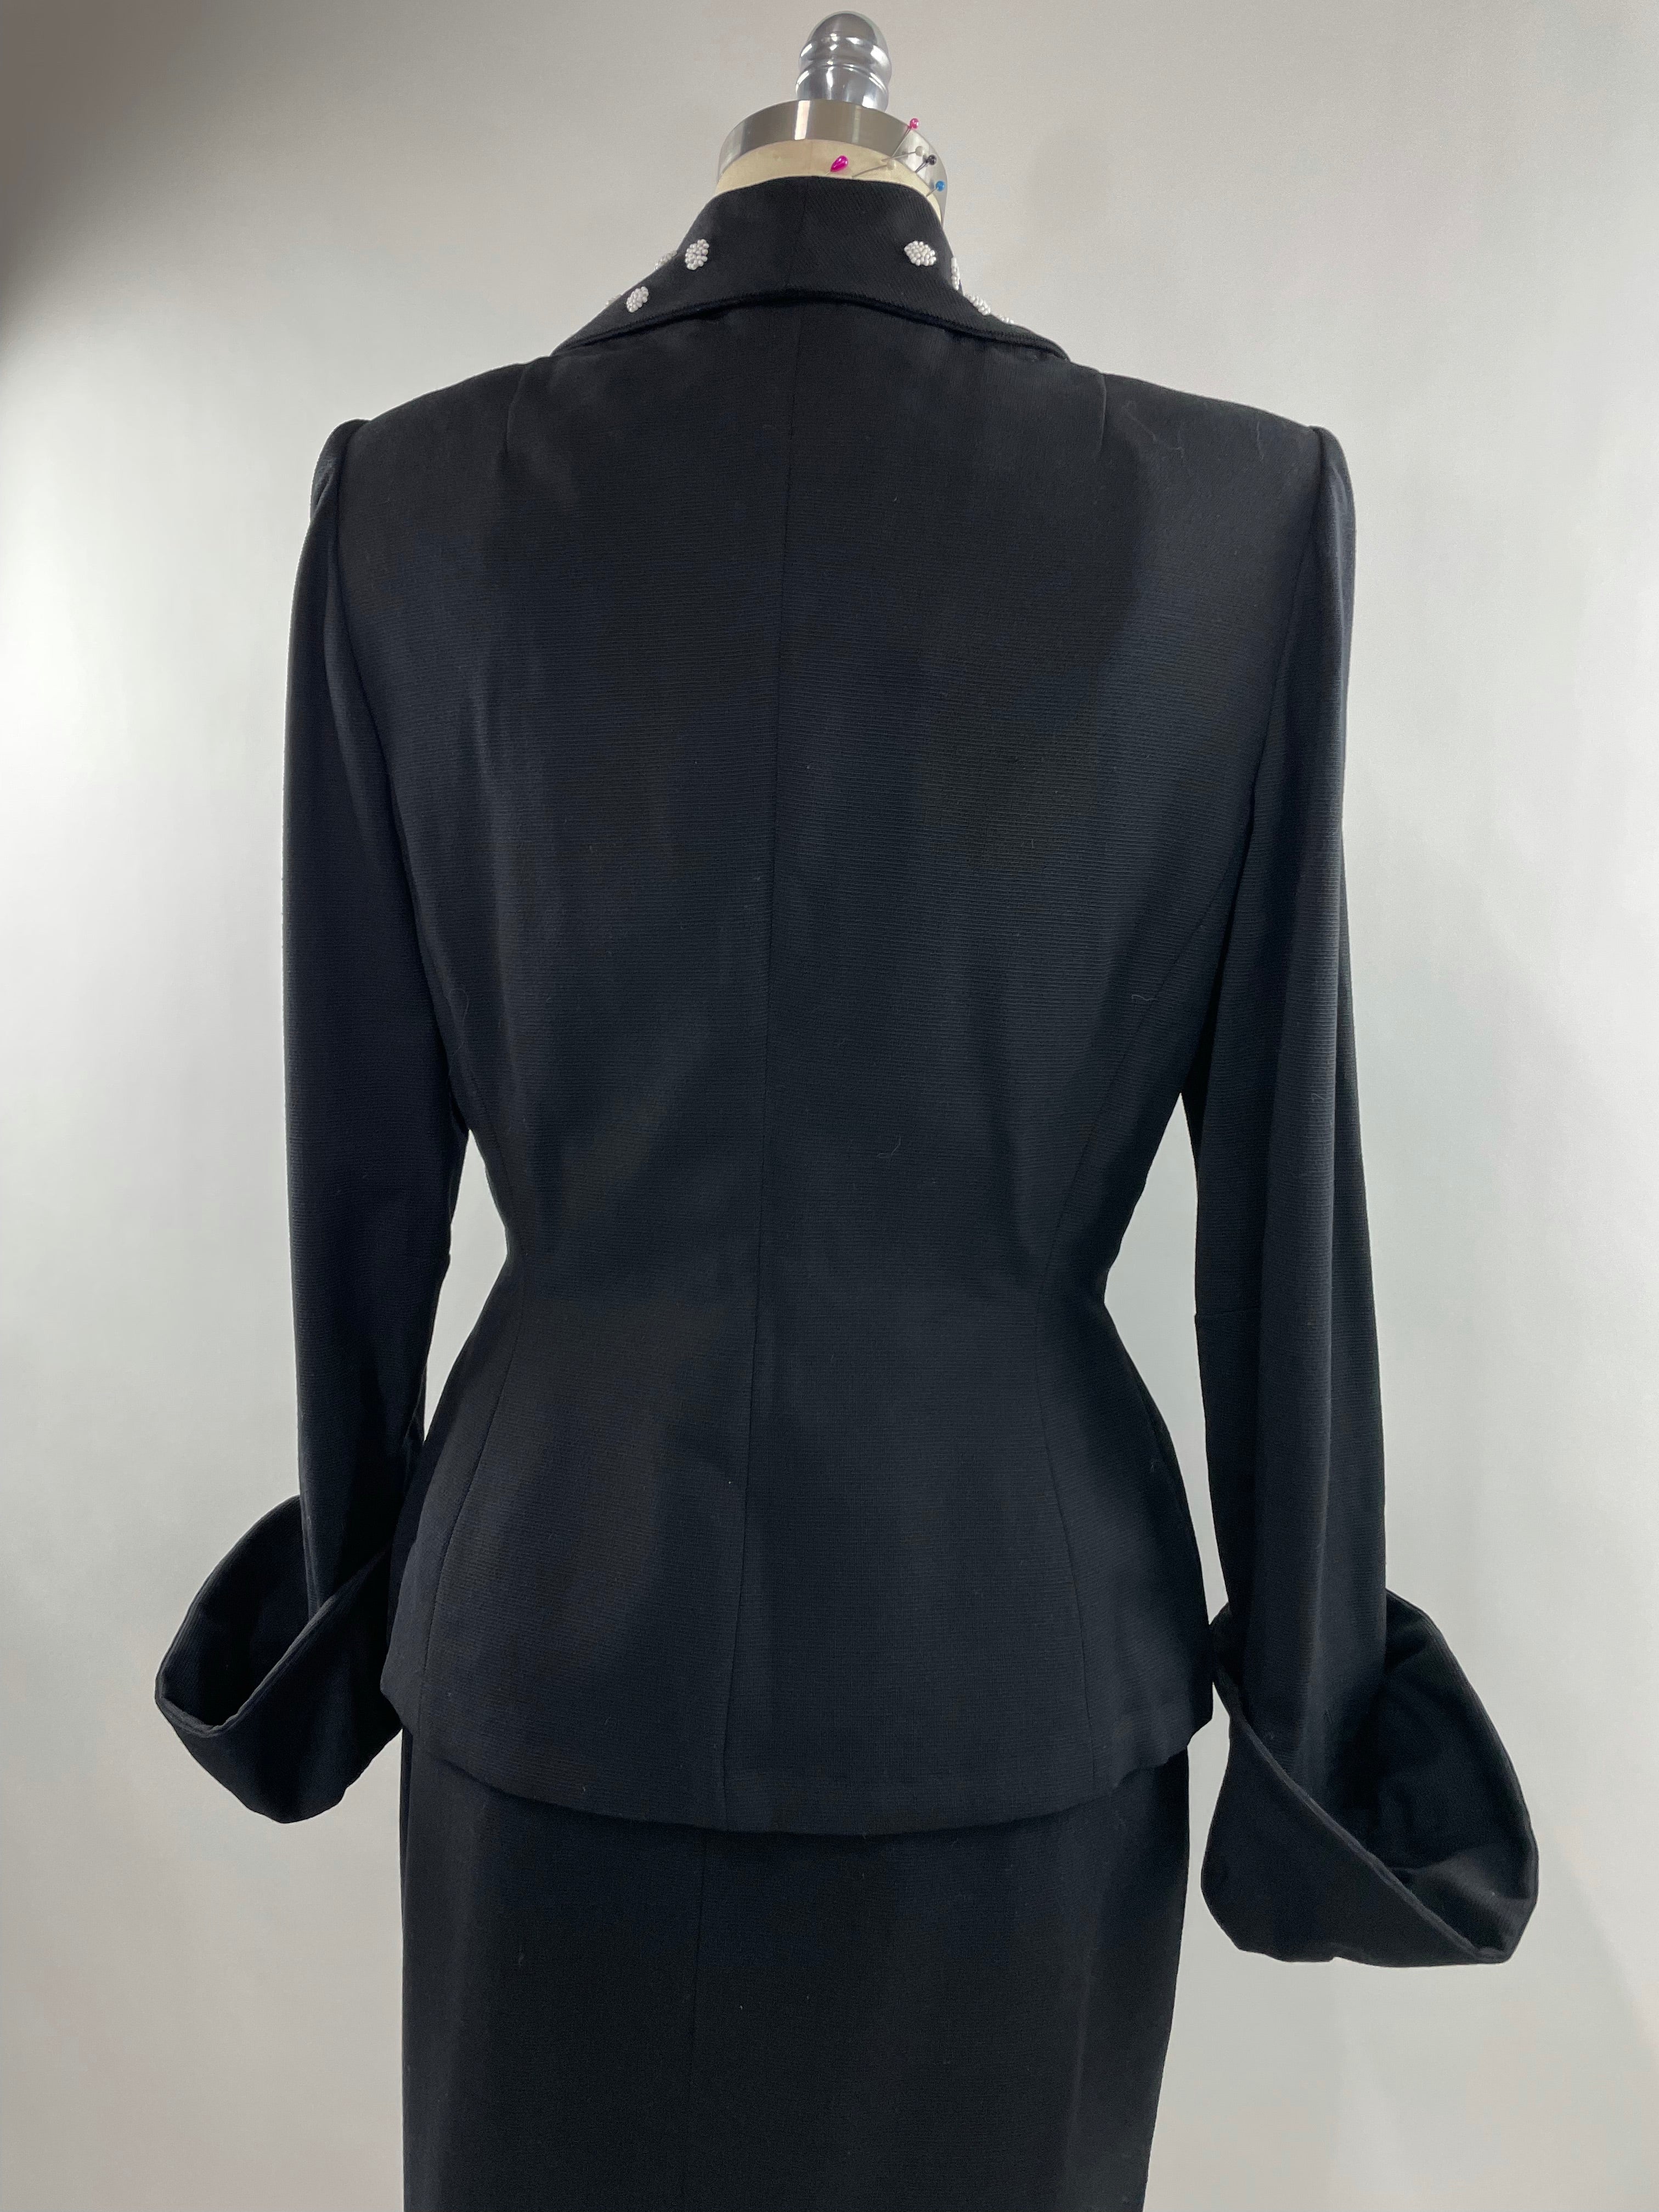 1950s Black Lilli Ann Skirt Suit with White Beading Size XL